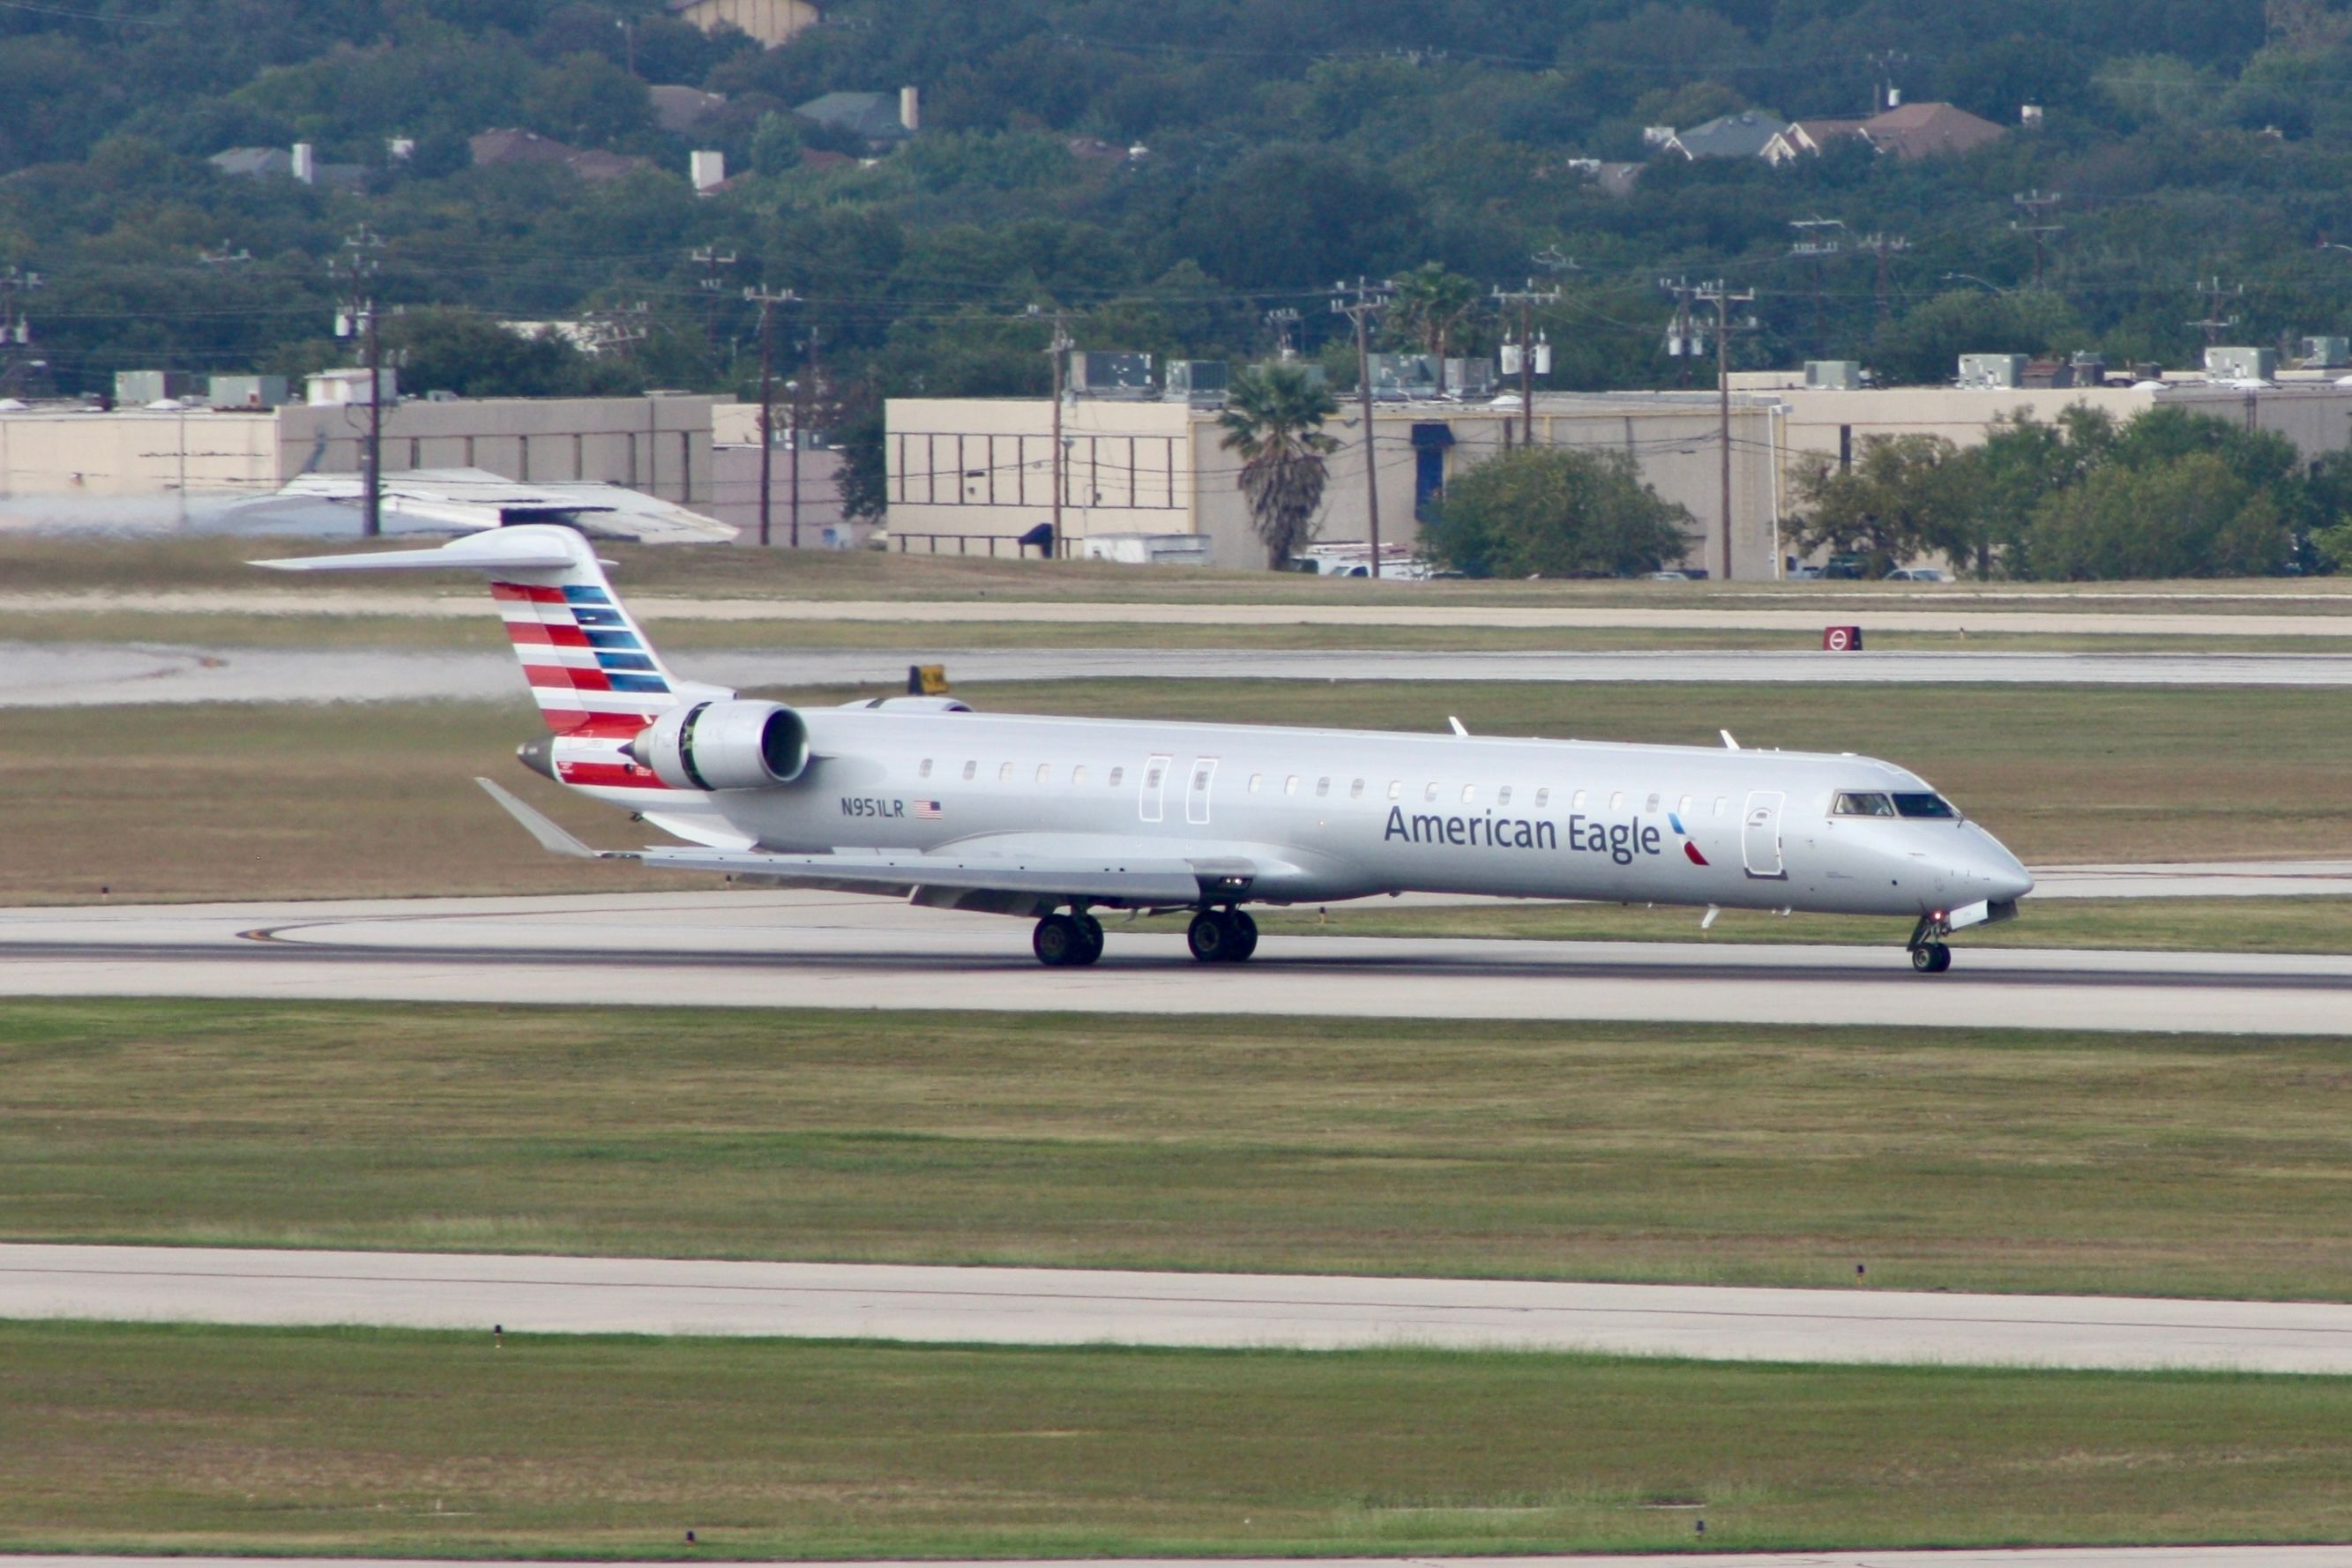 American airlines operate the CRJ-900 on the route